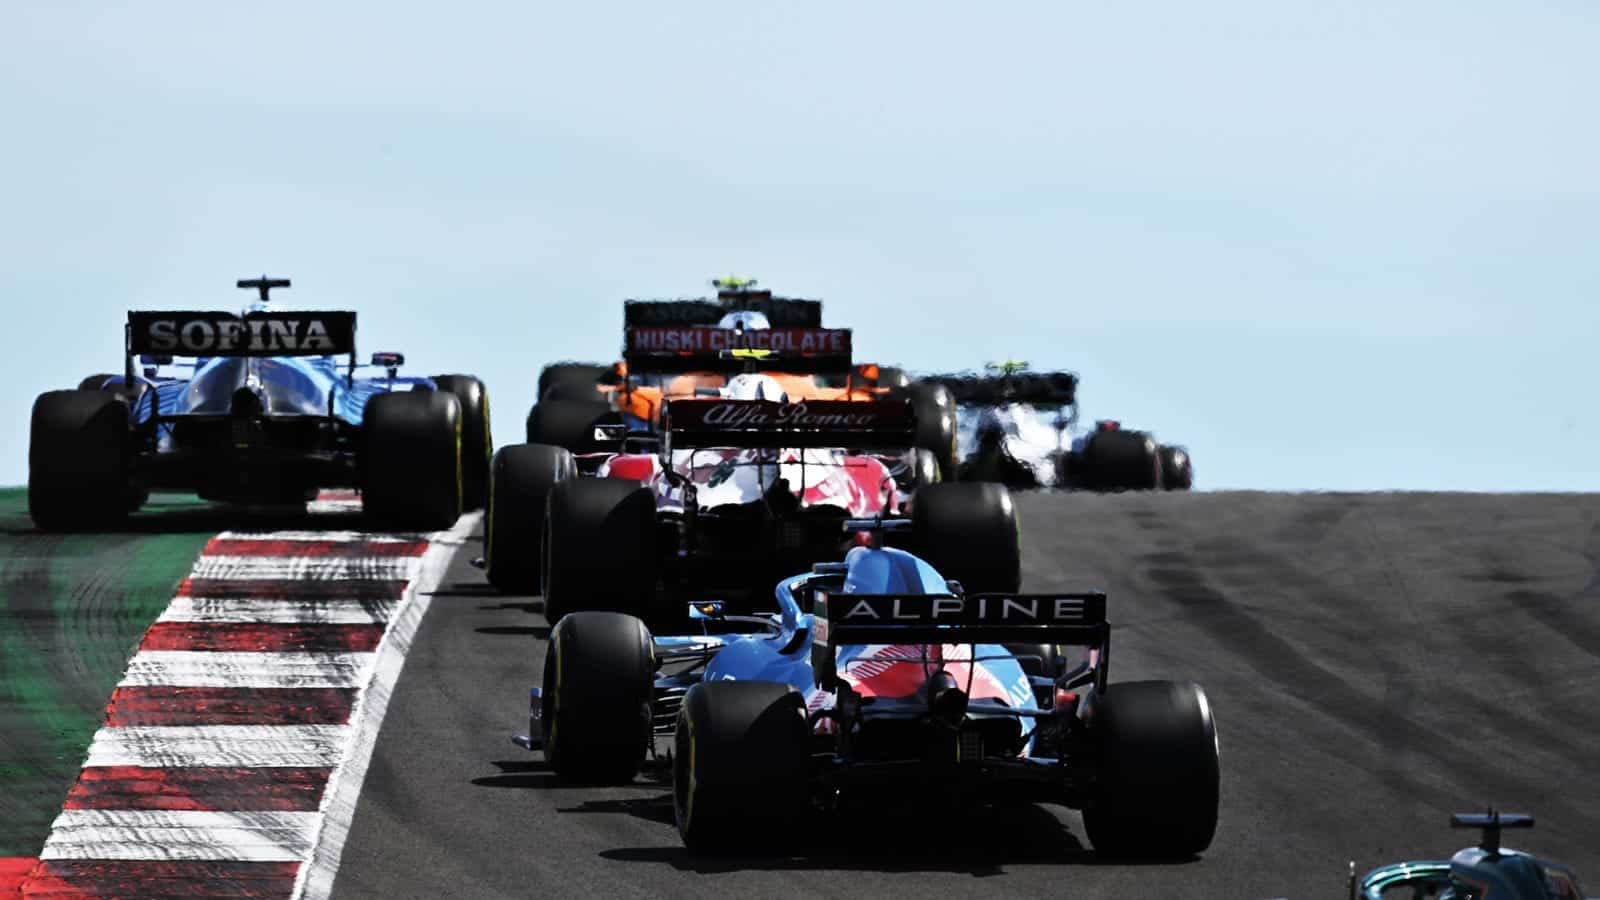 Rear view of cars at the 2021 Portuguese Grand Prix